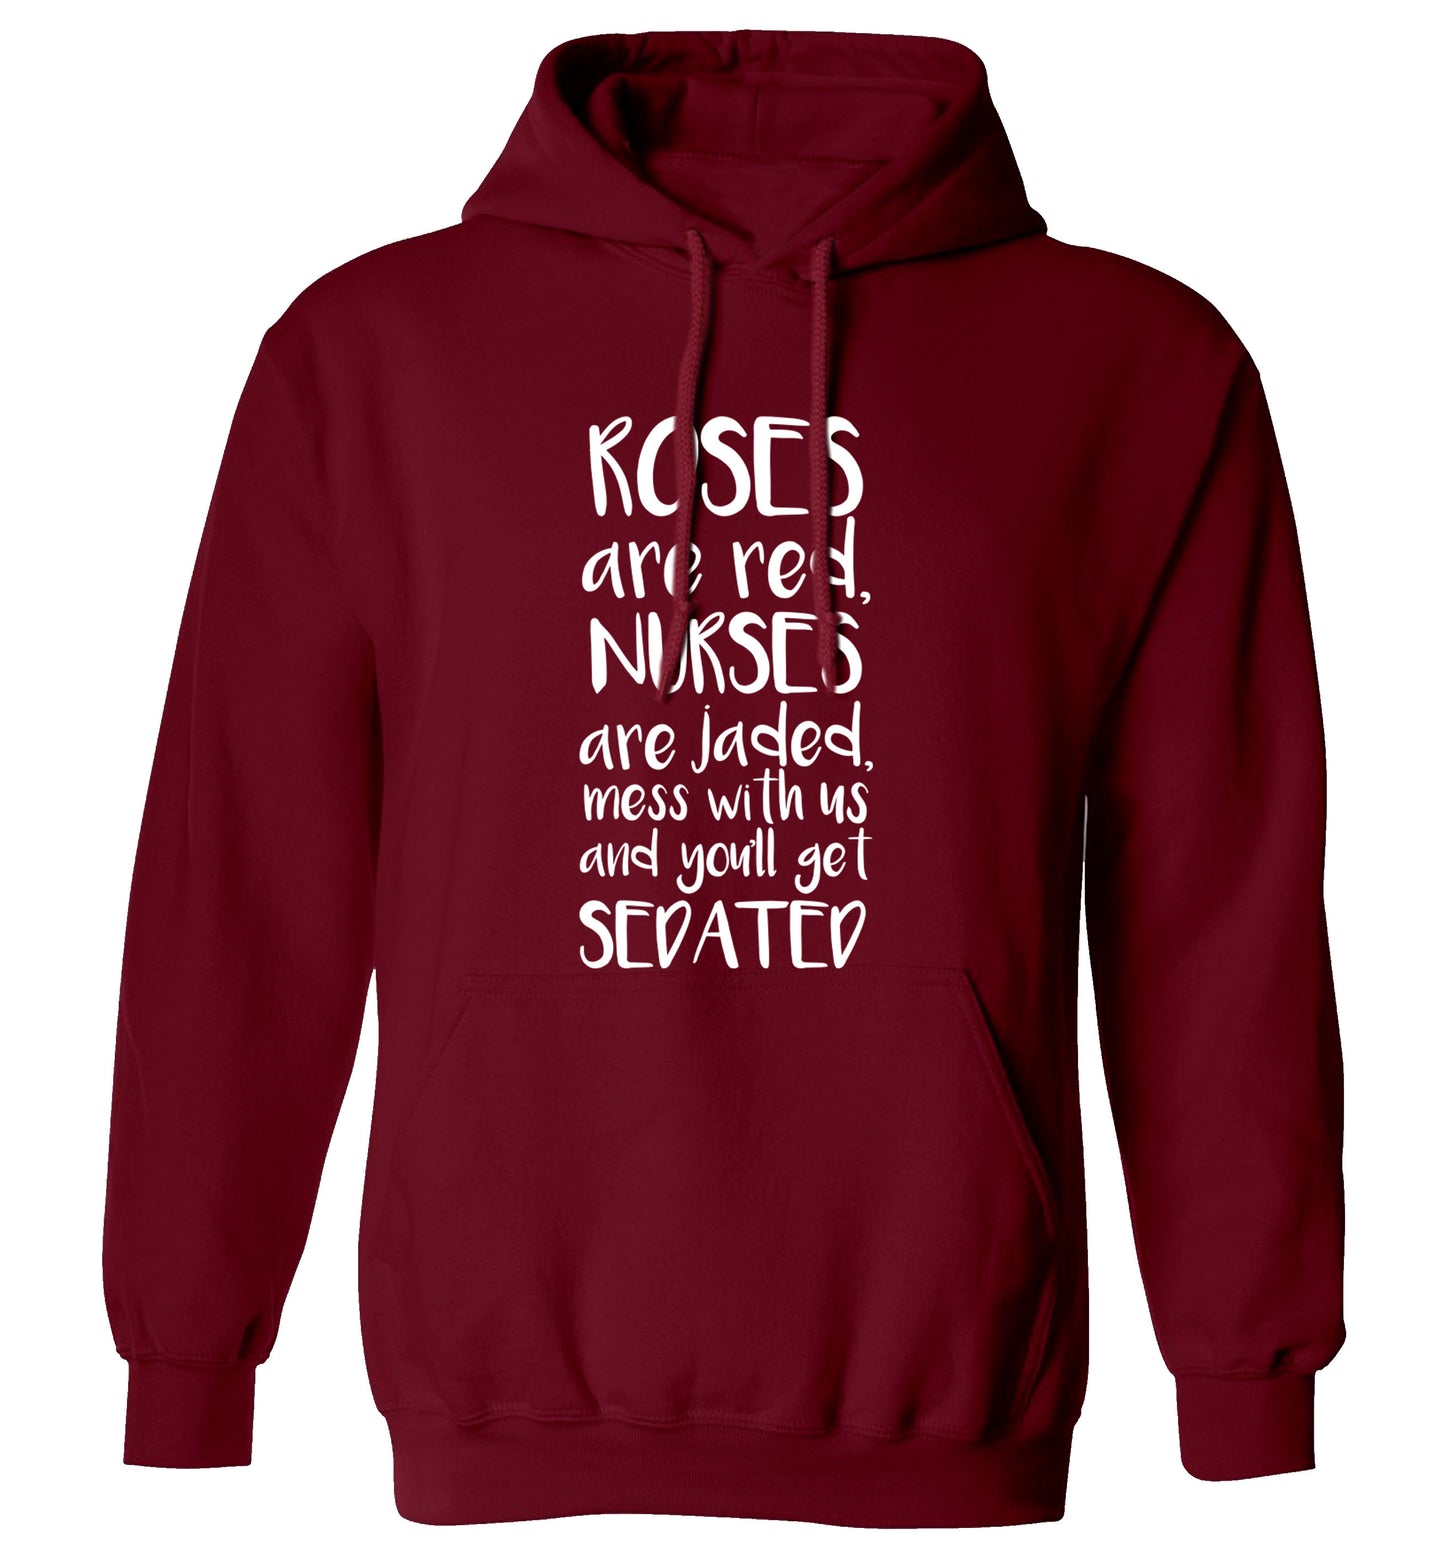 Roses are red, nurses are jaded, mess with us and you'll get sedated adults unisex maroon hoodie 2XL